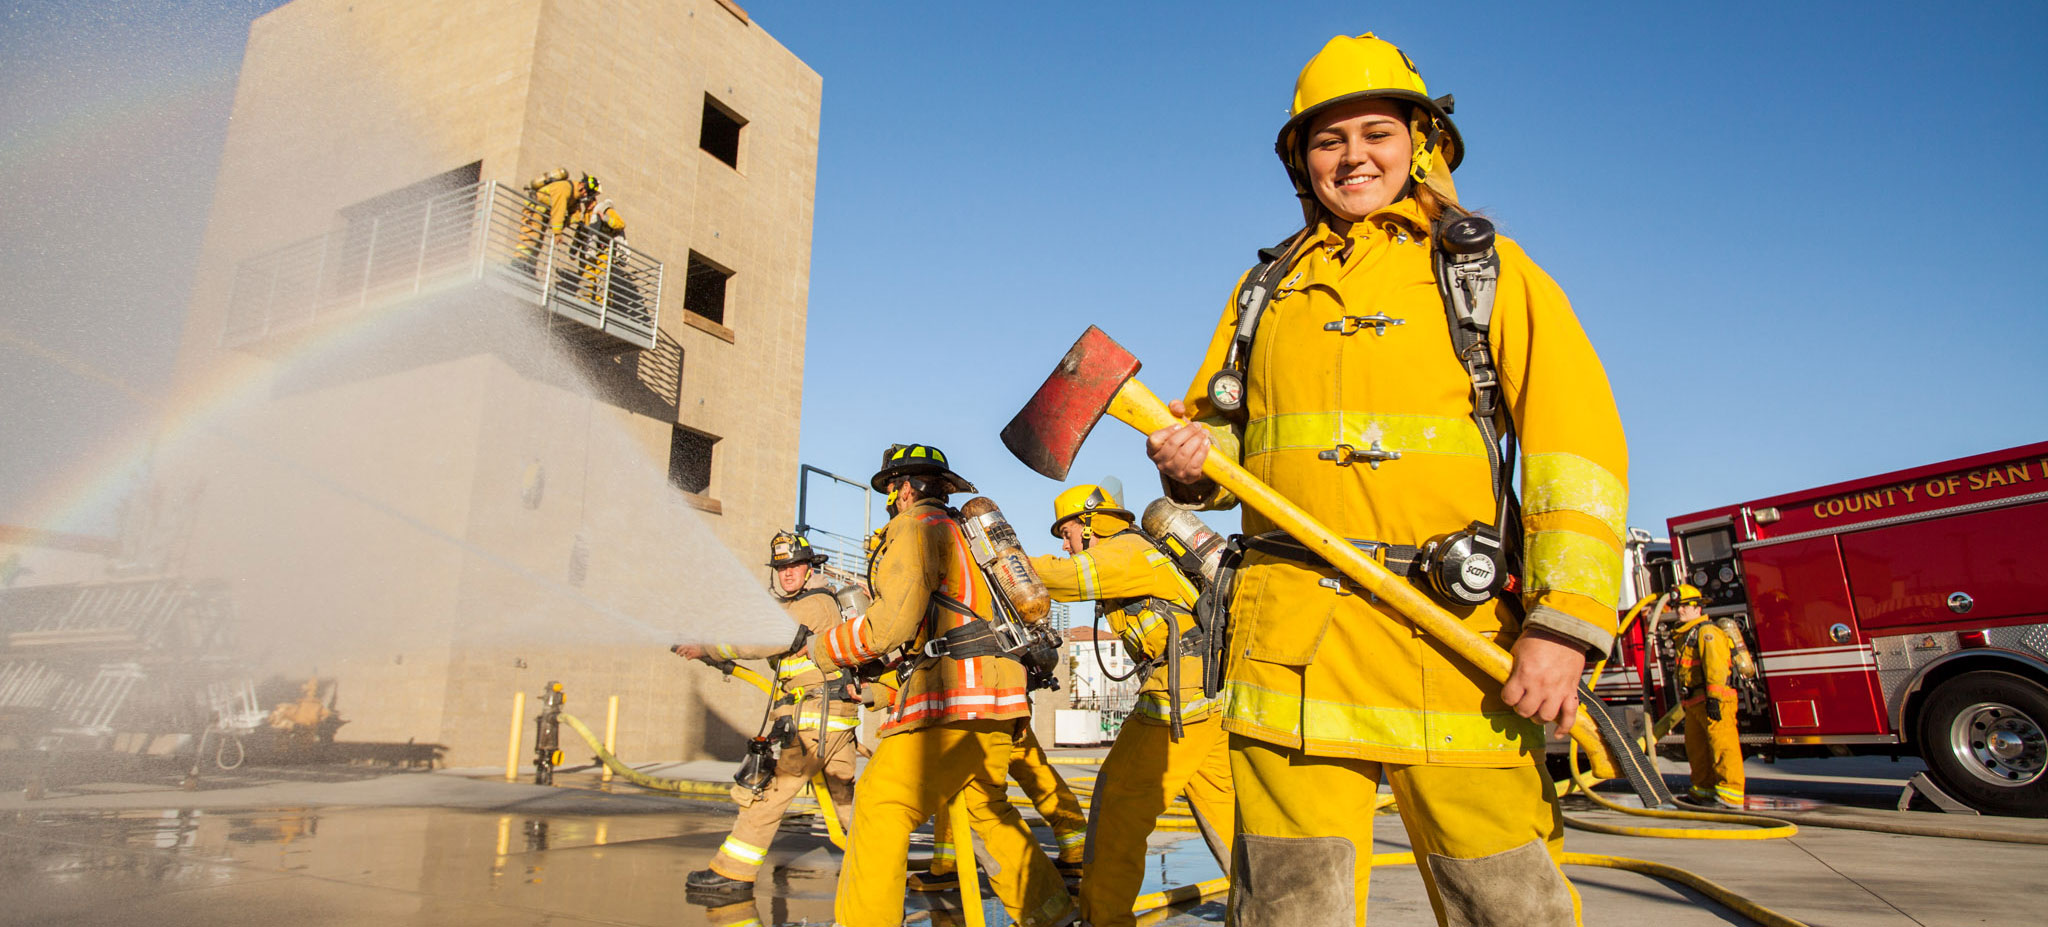 A firefighting student is wearing yellow protective fire gear and holding an axe. There are three fire students behind her in yellow gear using a fire hose.